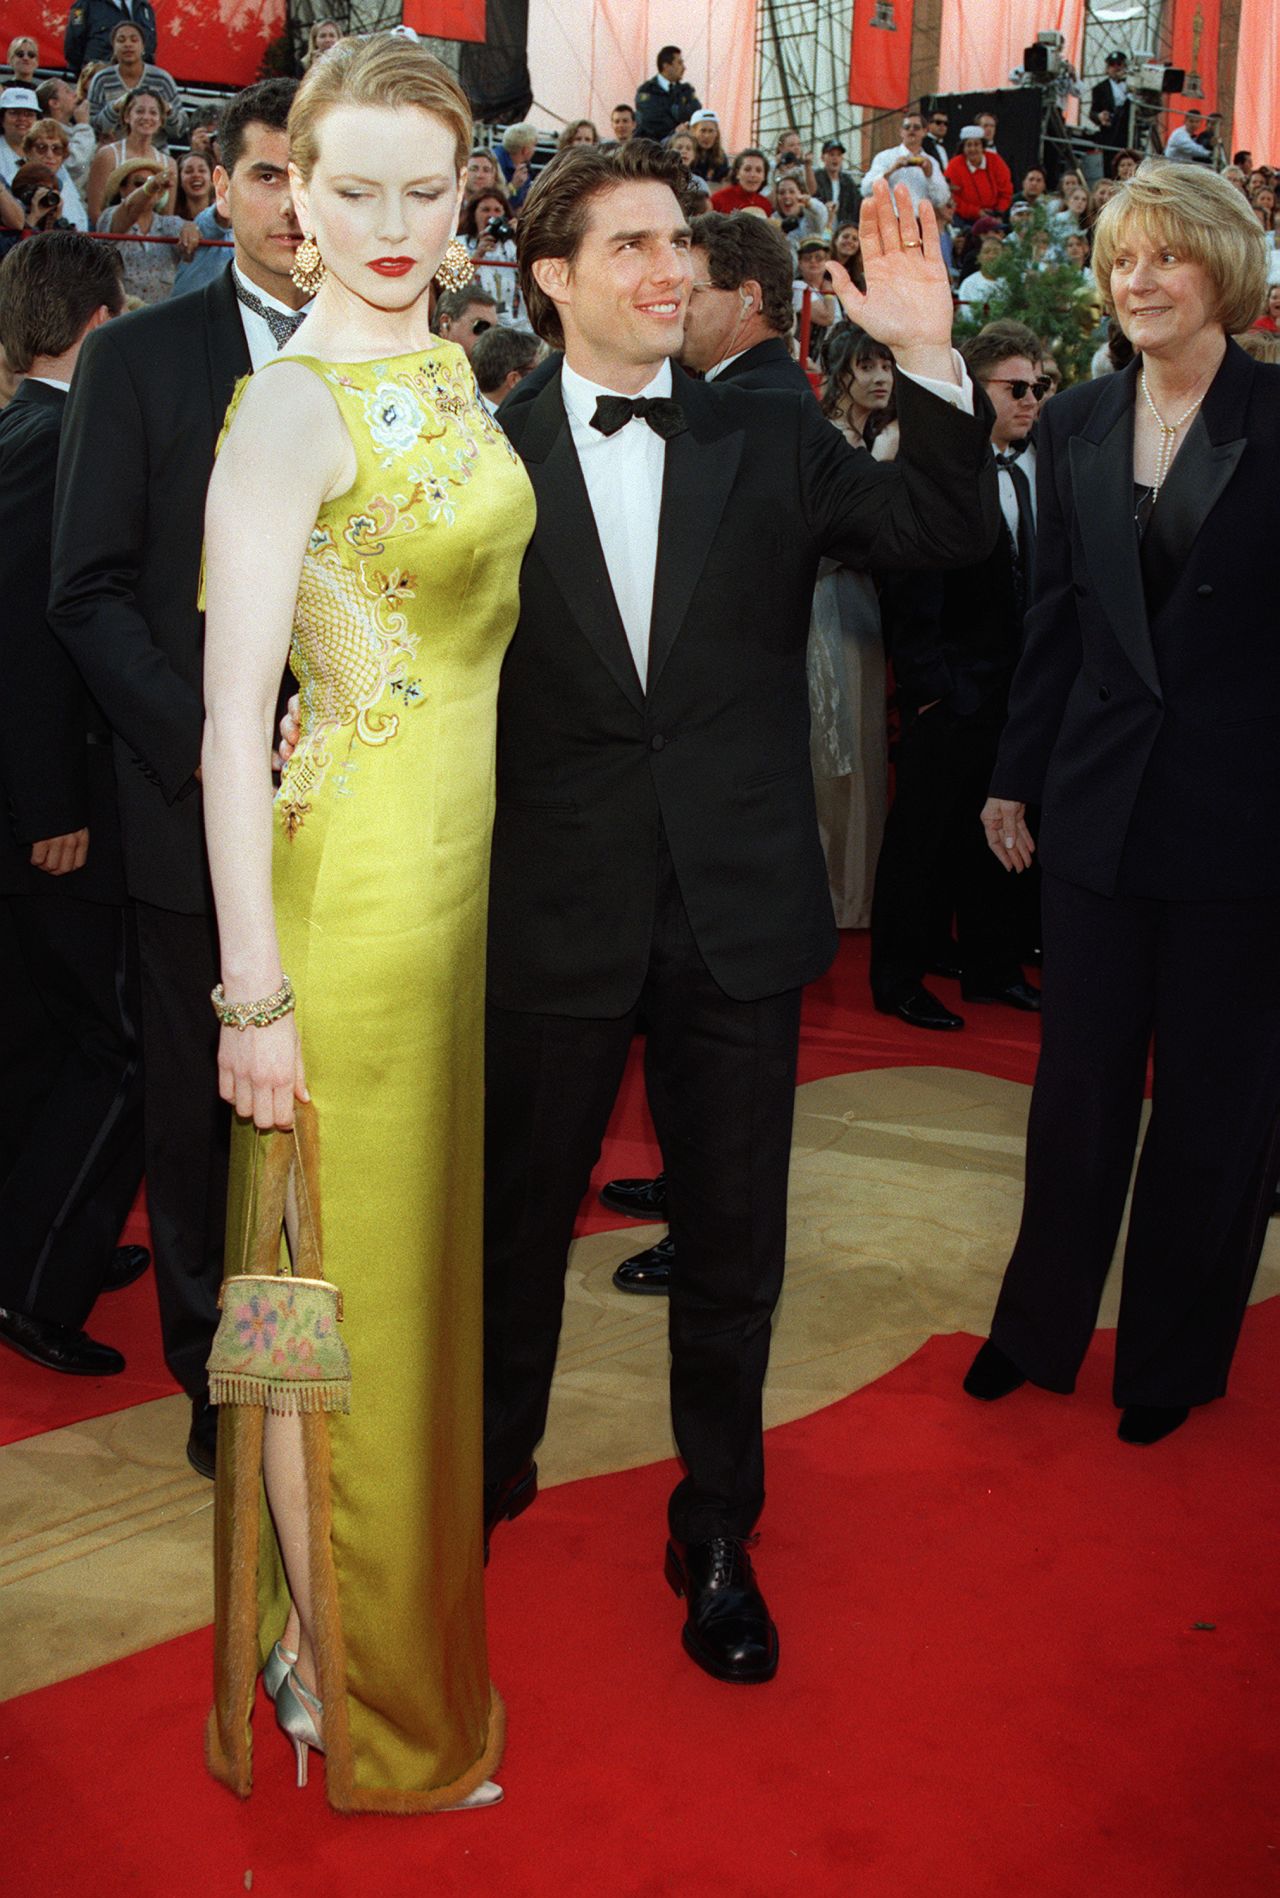 Tom Cruise and Nicole Kidman on the red carpet for the 69th Academy Awards in 1997. 